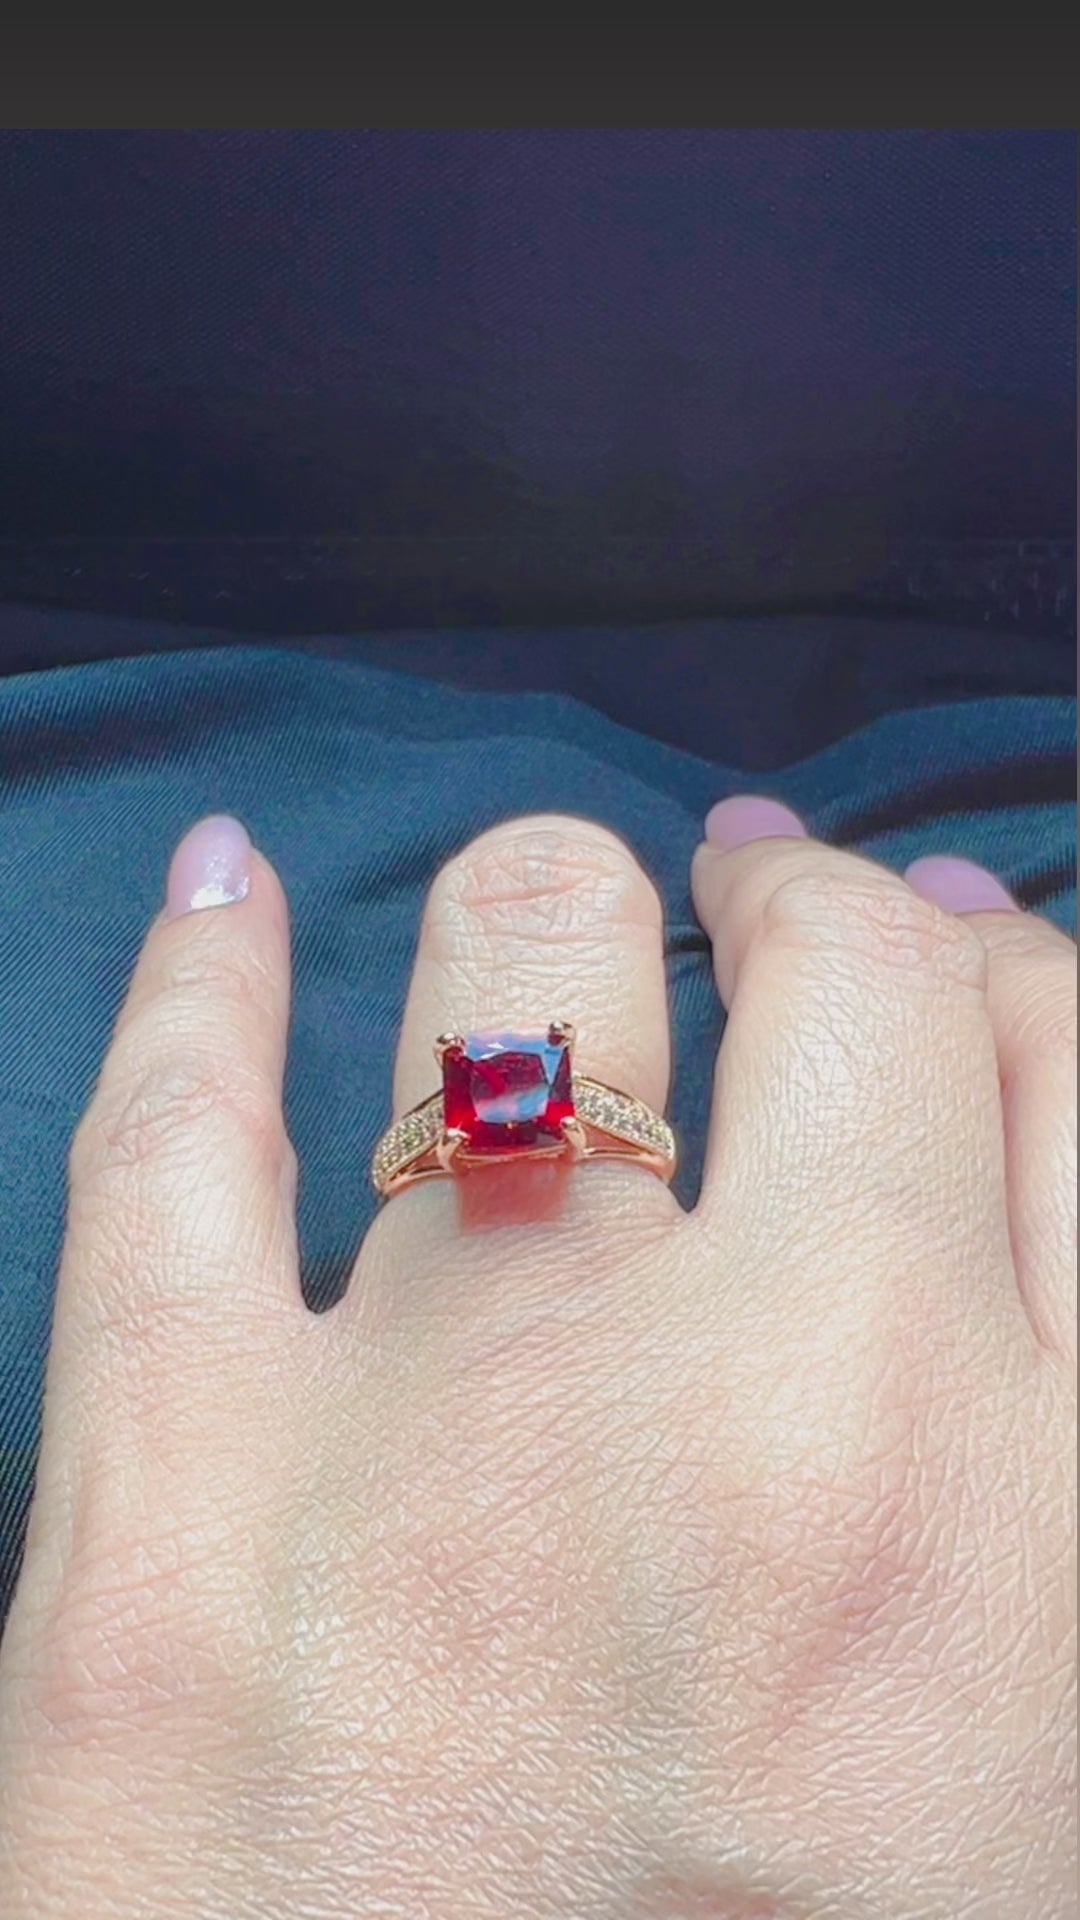 main stone on the ring is square blood red and band is embellished with white cubic zircons